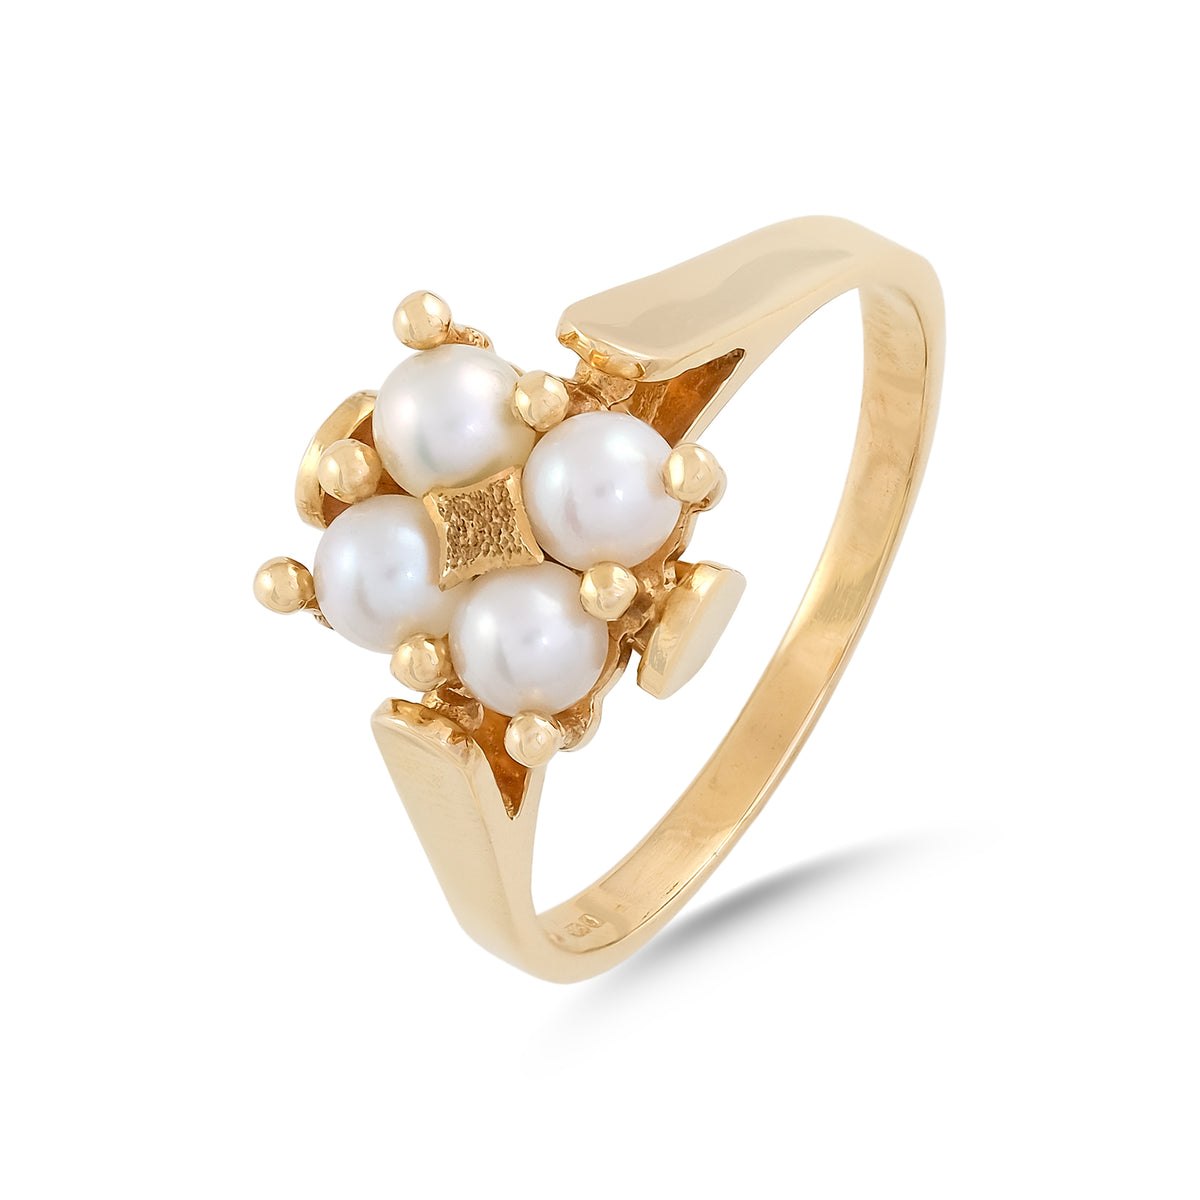 Vintage 14ct Yellow Gold Four Pearl Ring